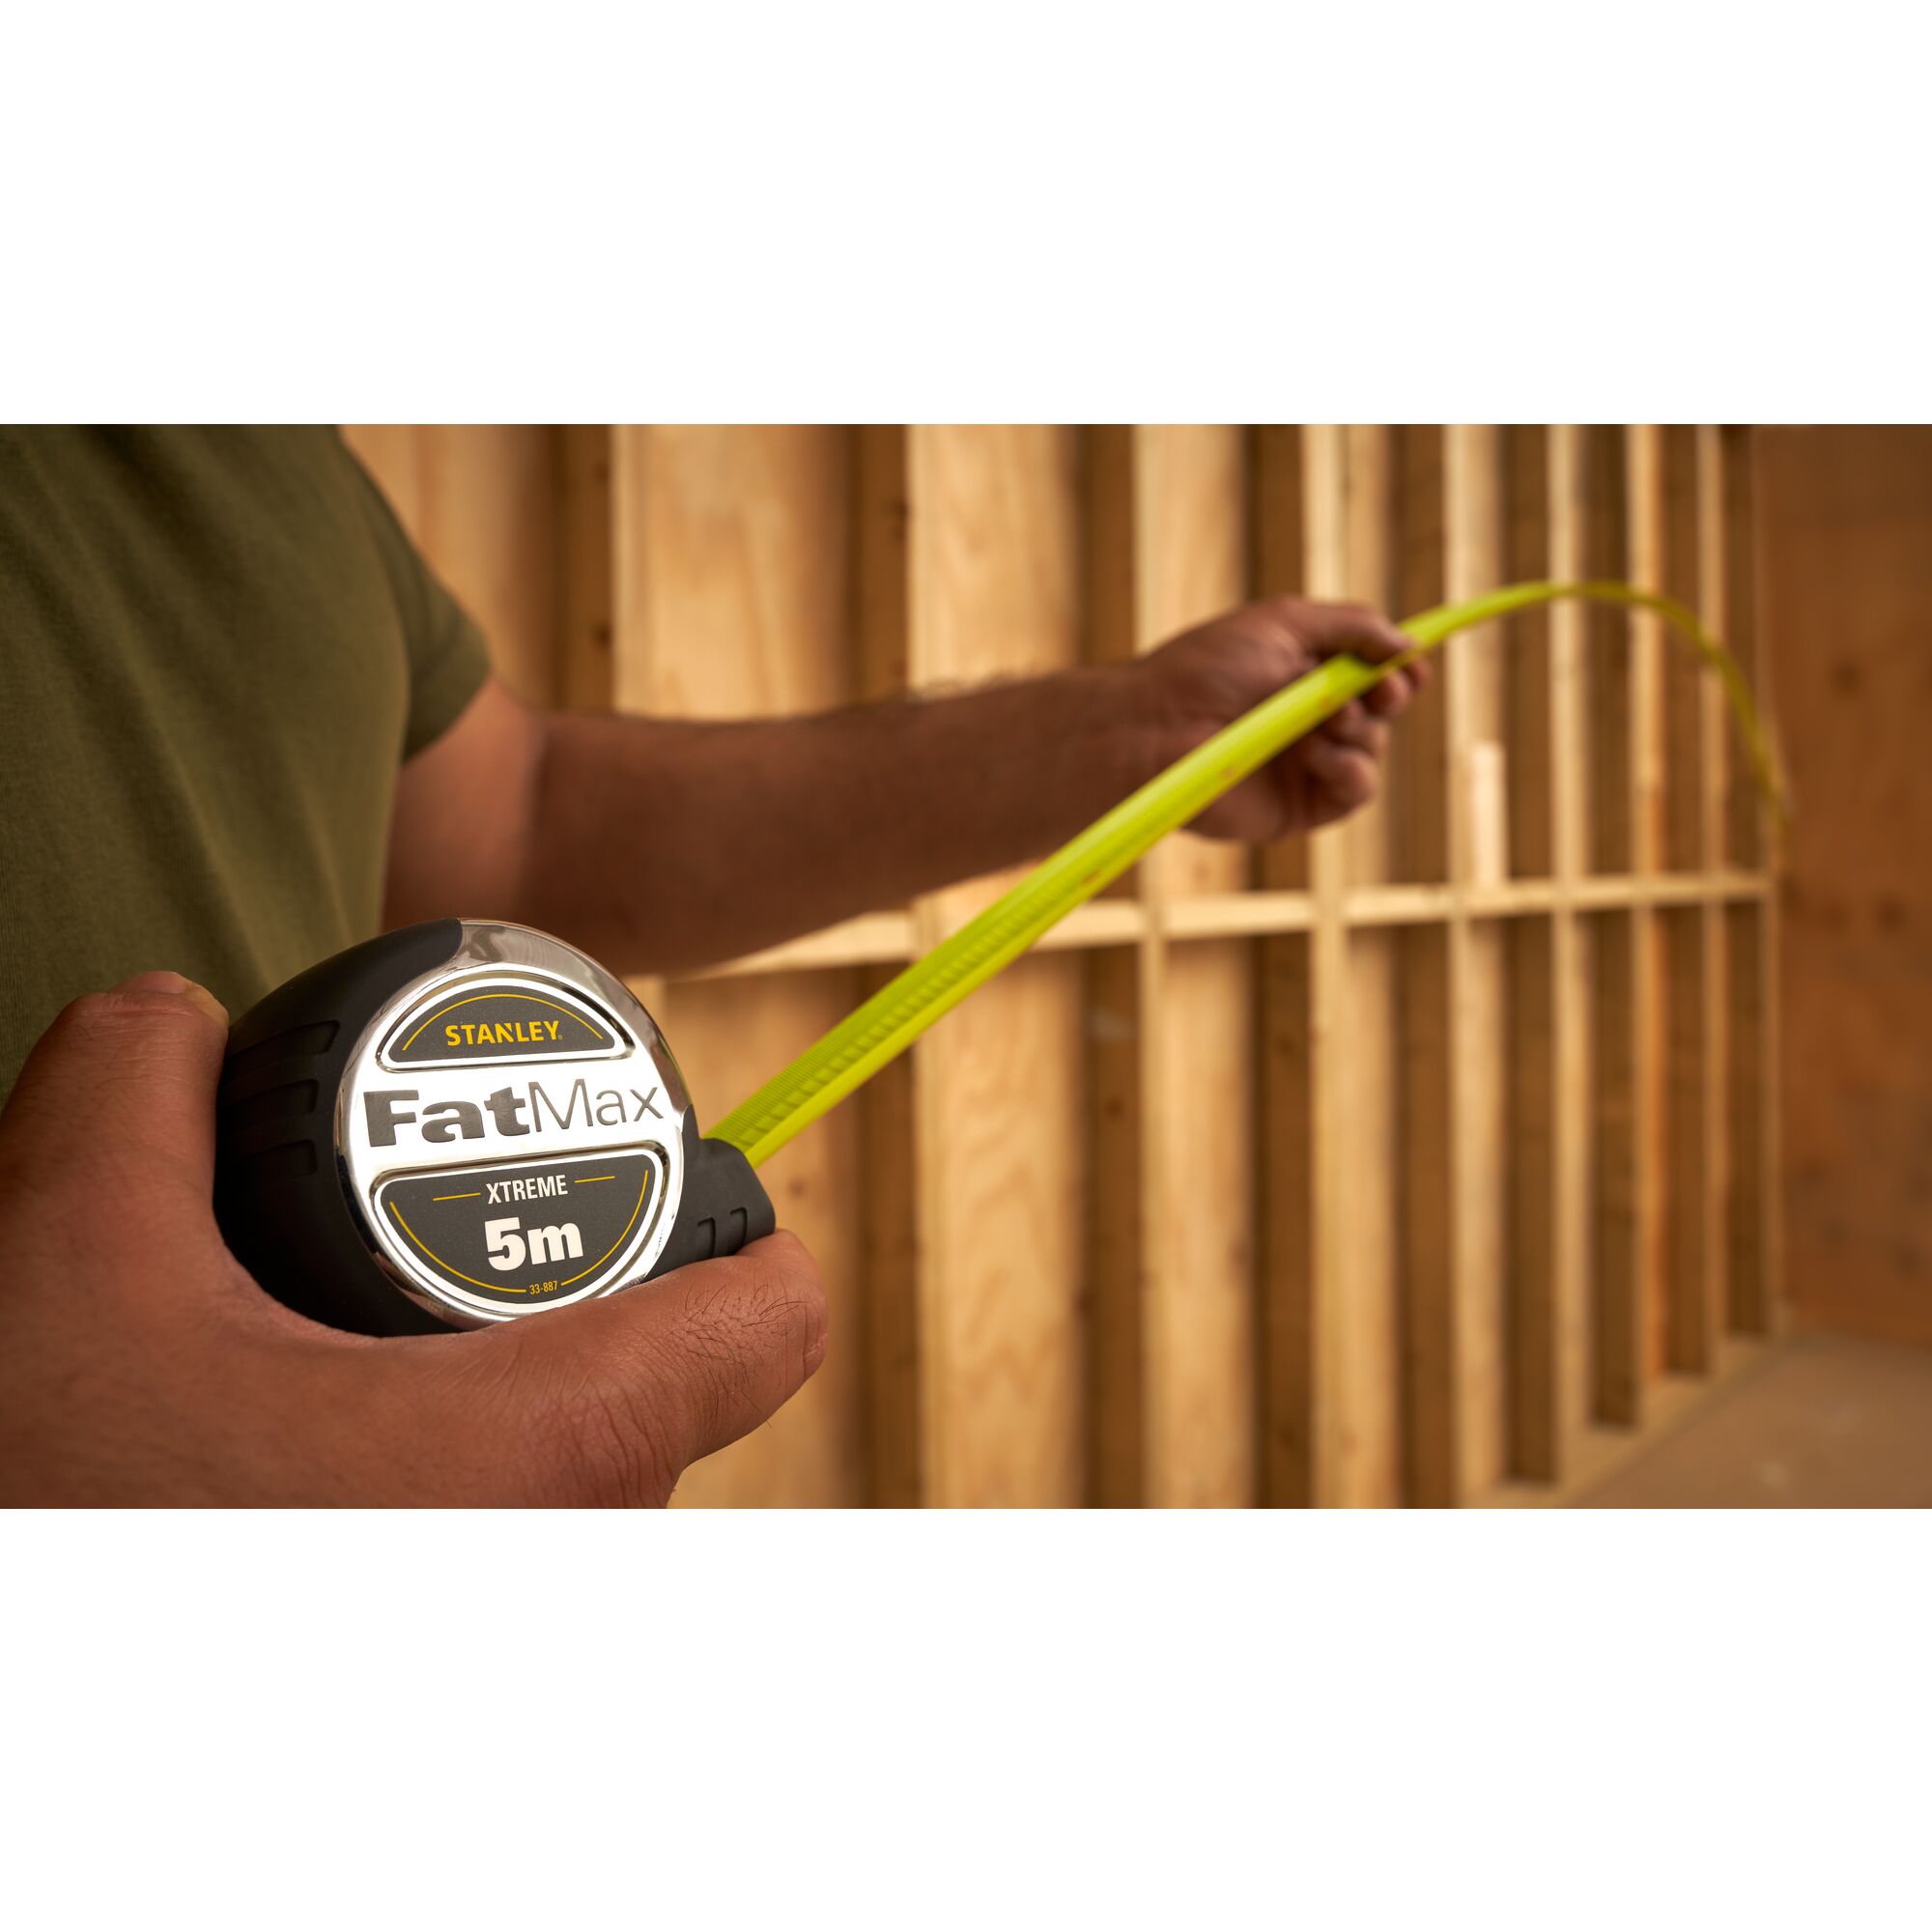 STANLEY® FATMAX® Xtreme™ 5M (32mm Wide) Tape Measure | STANLEY